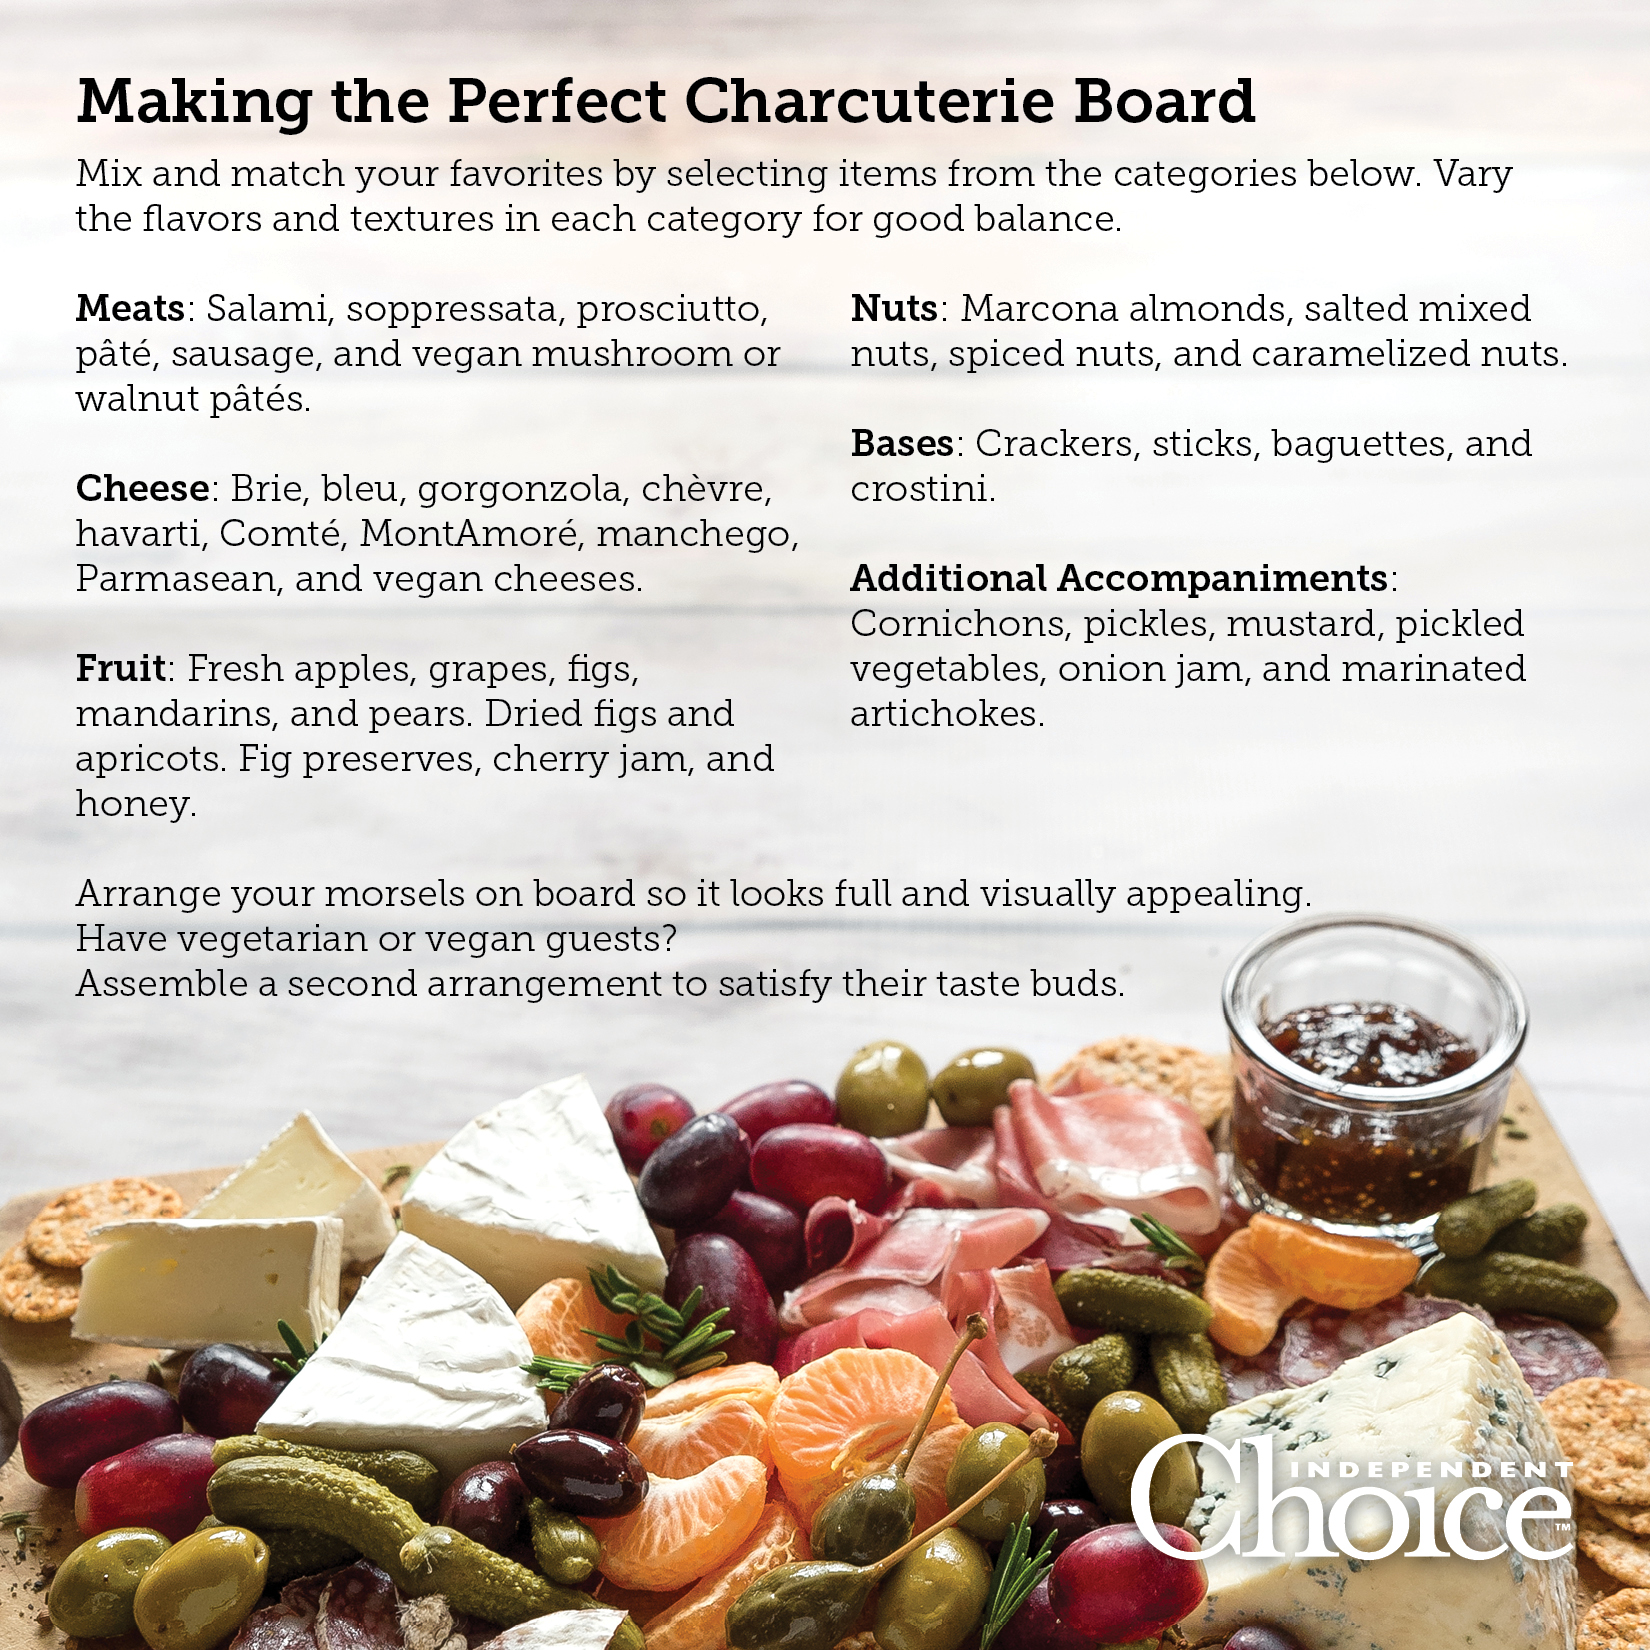 Making the Perfect Charcuterie Board